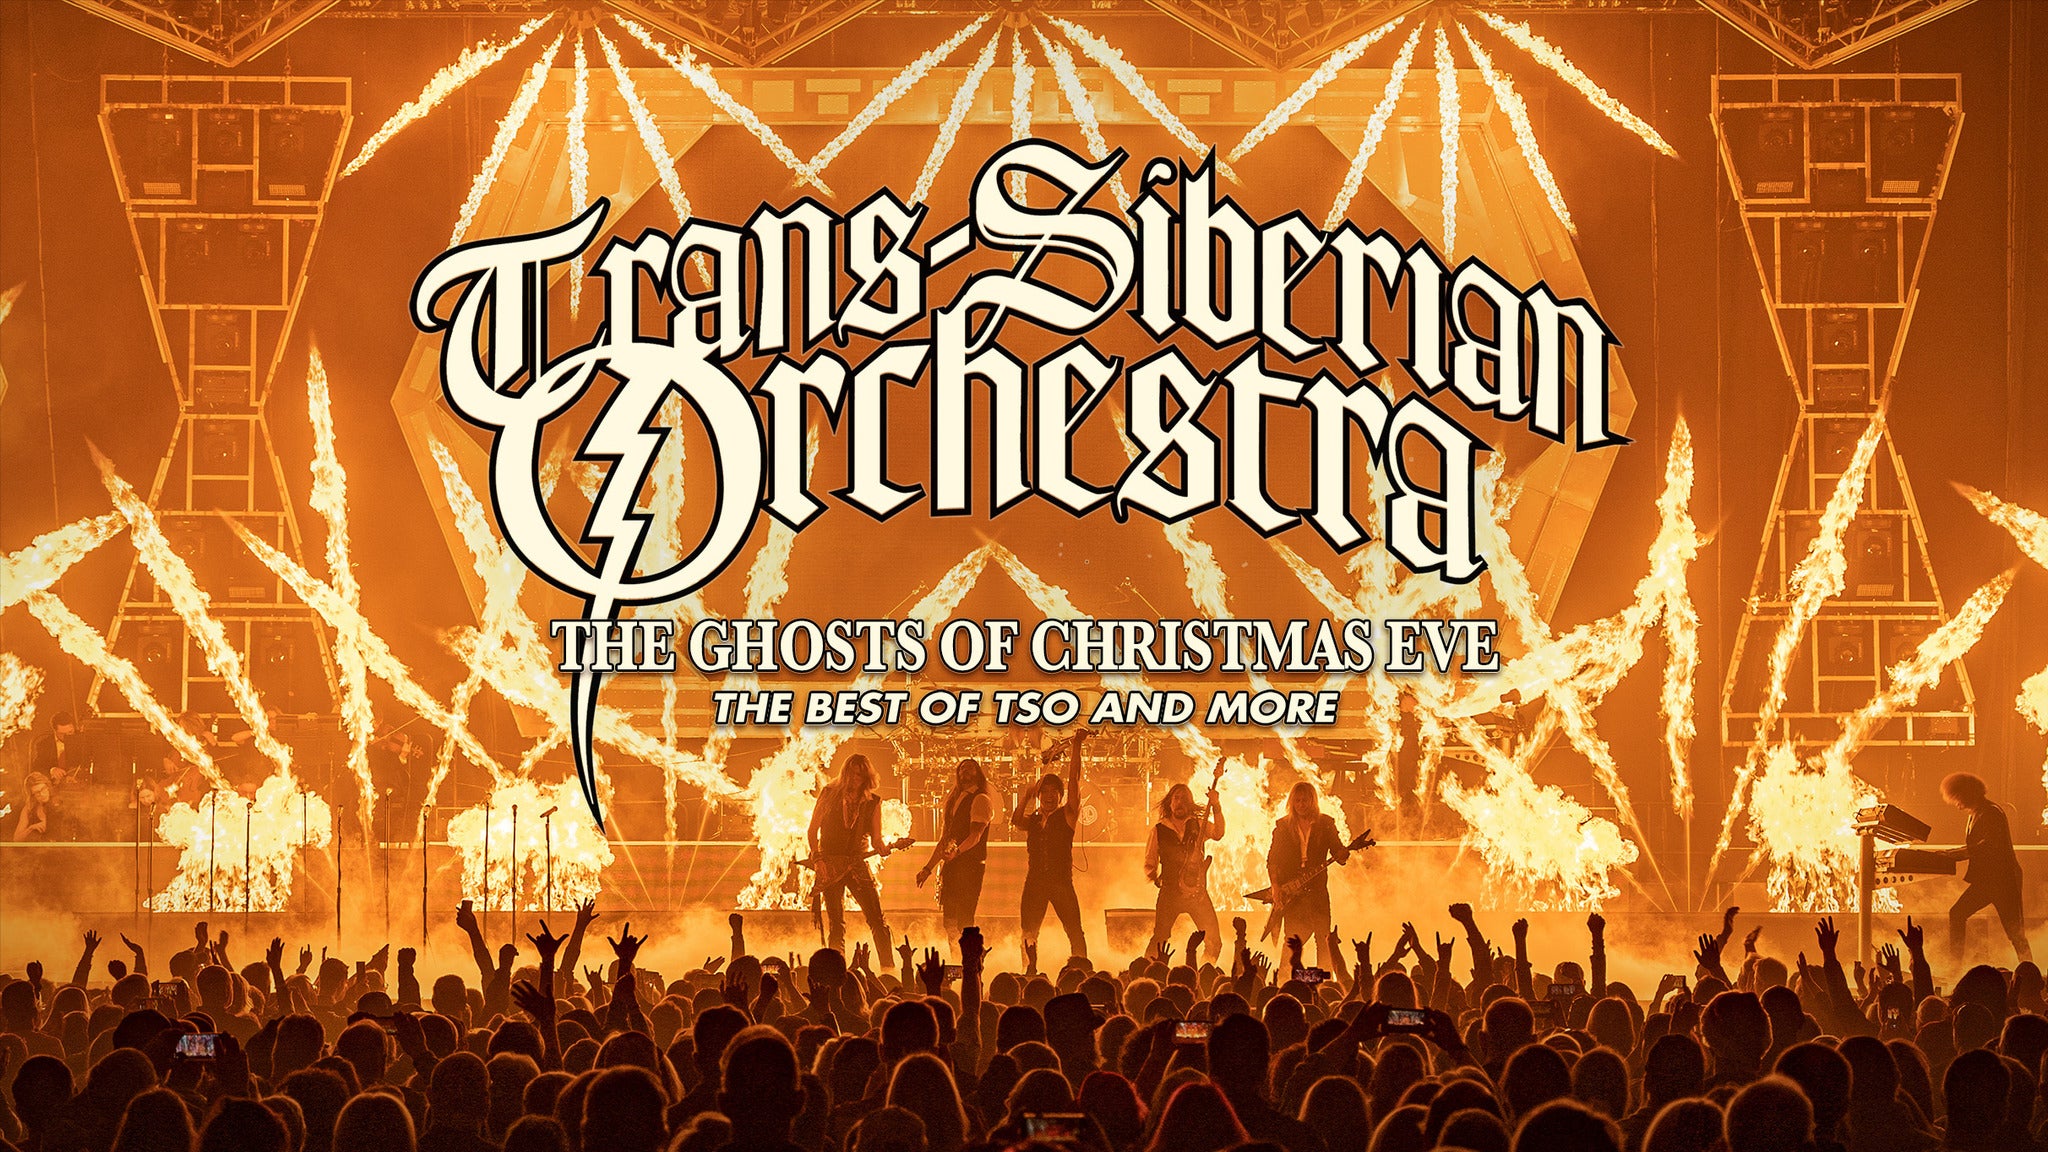 Trans-Siberian Orchestra – The Ghosts Of Christmas Eve